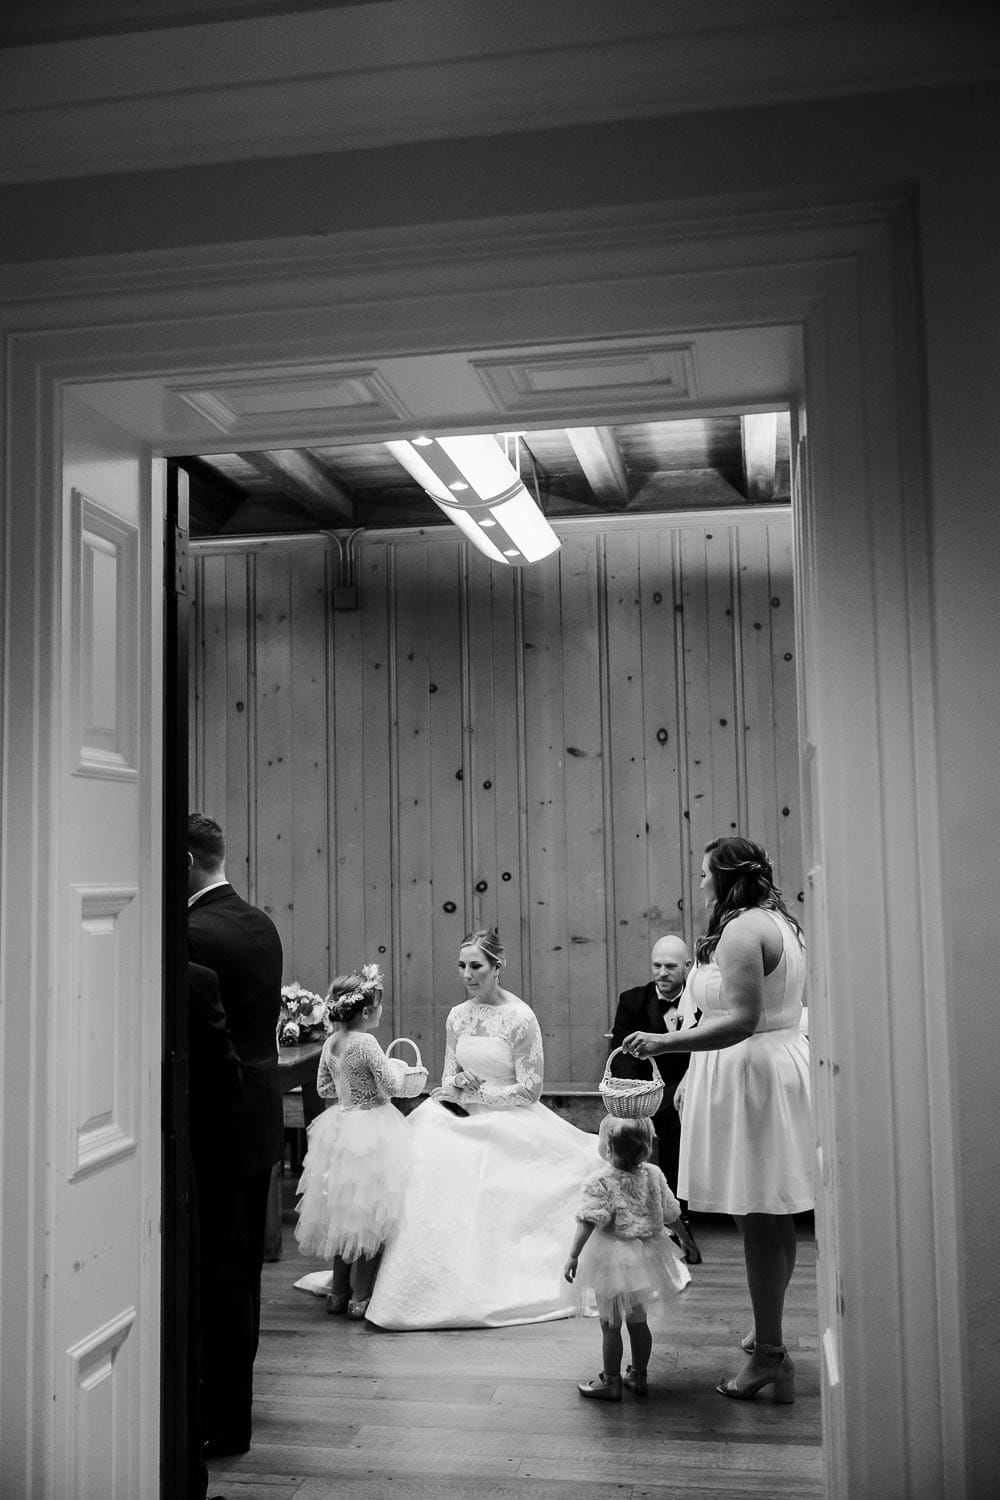 Photographed through the frame of a door shows the bride sitting with a flowergirl preceremony